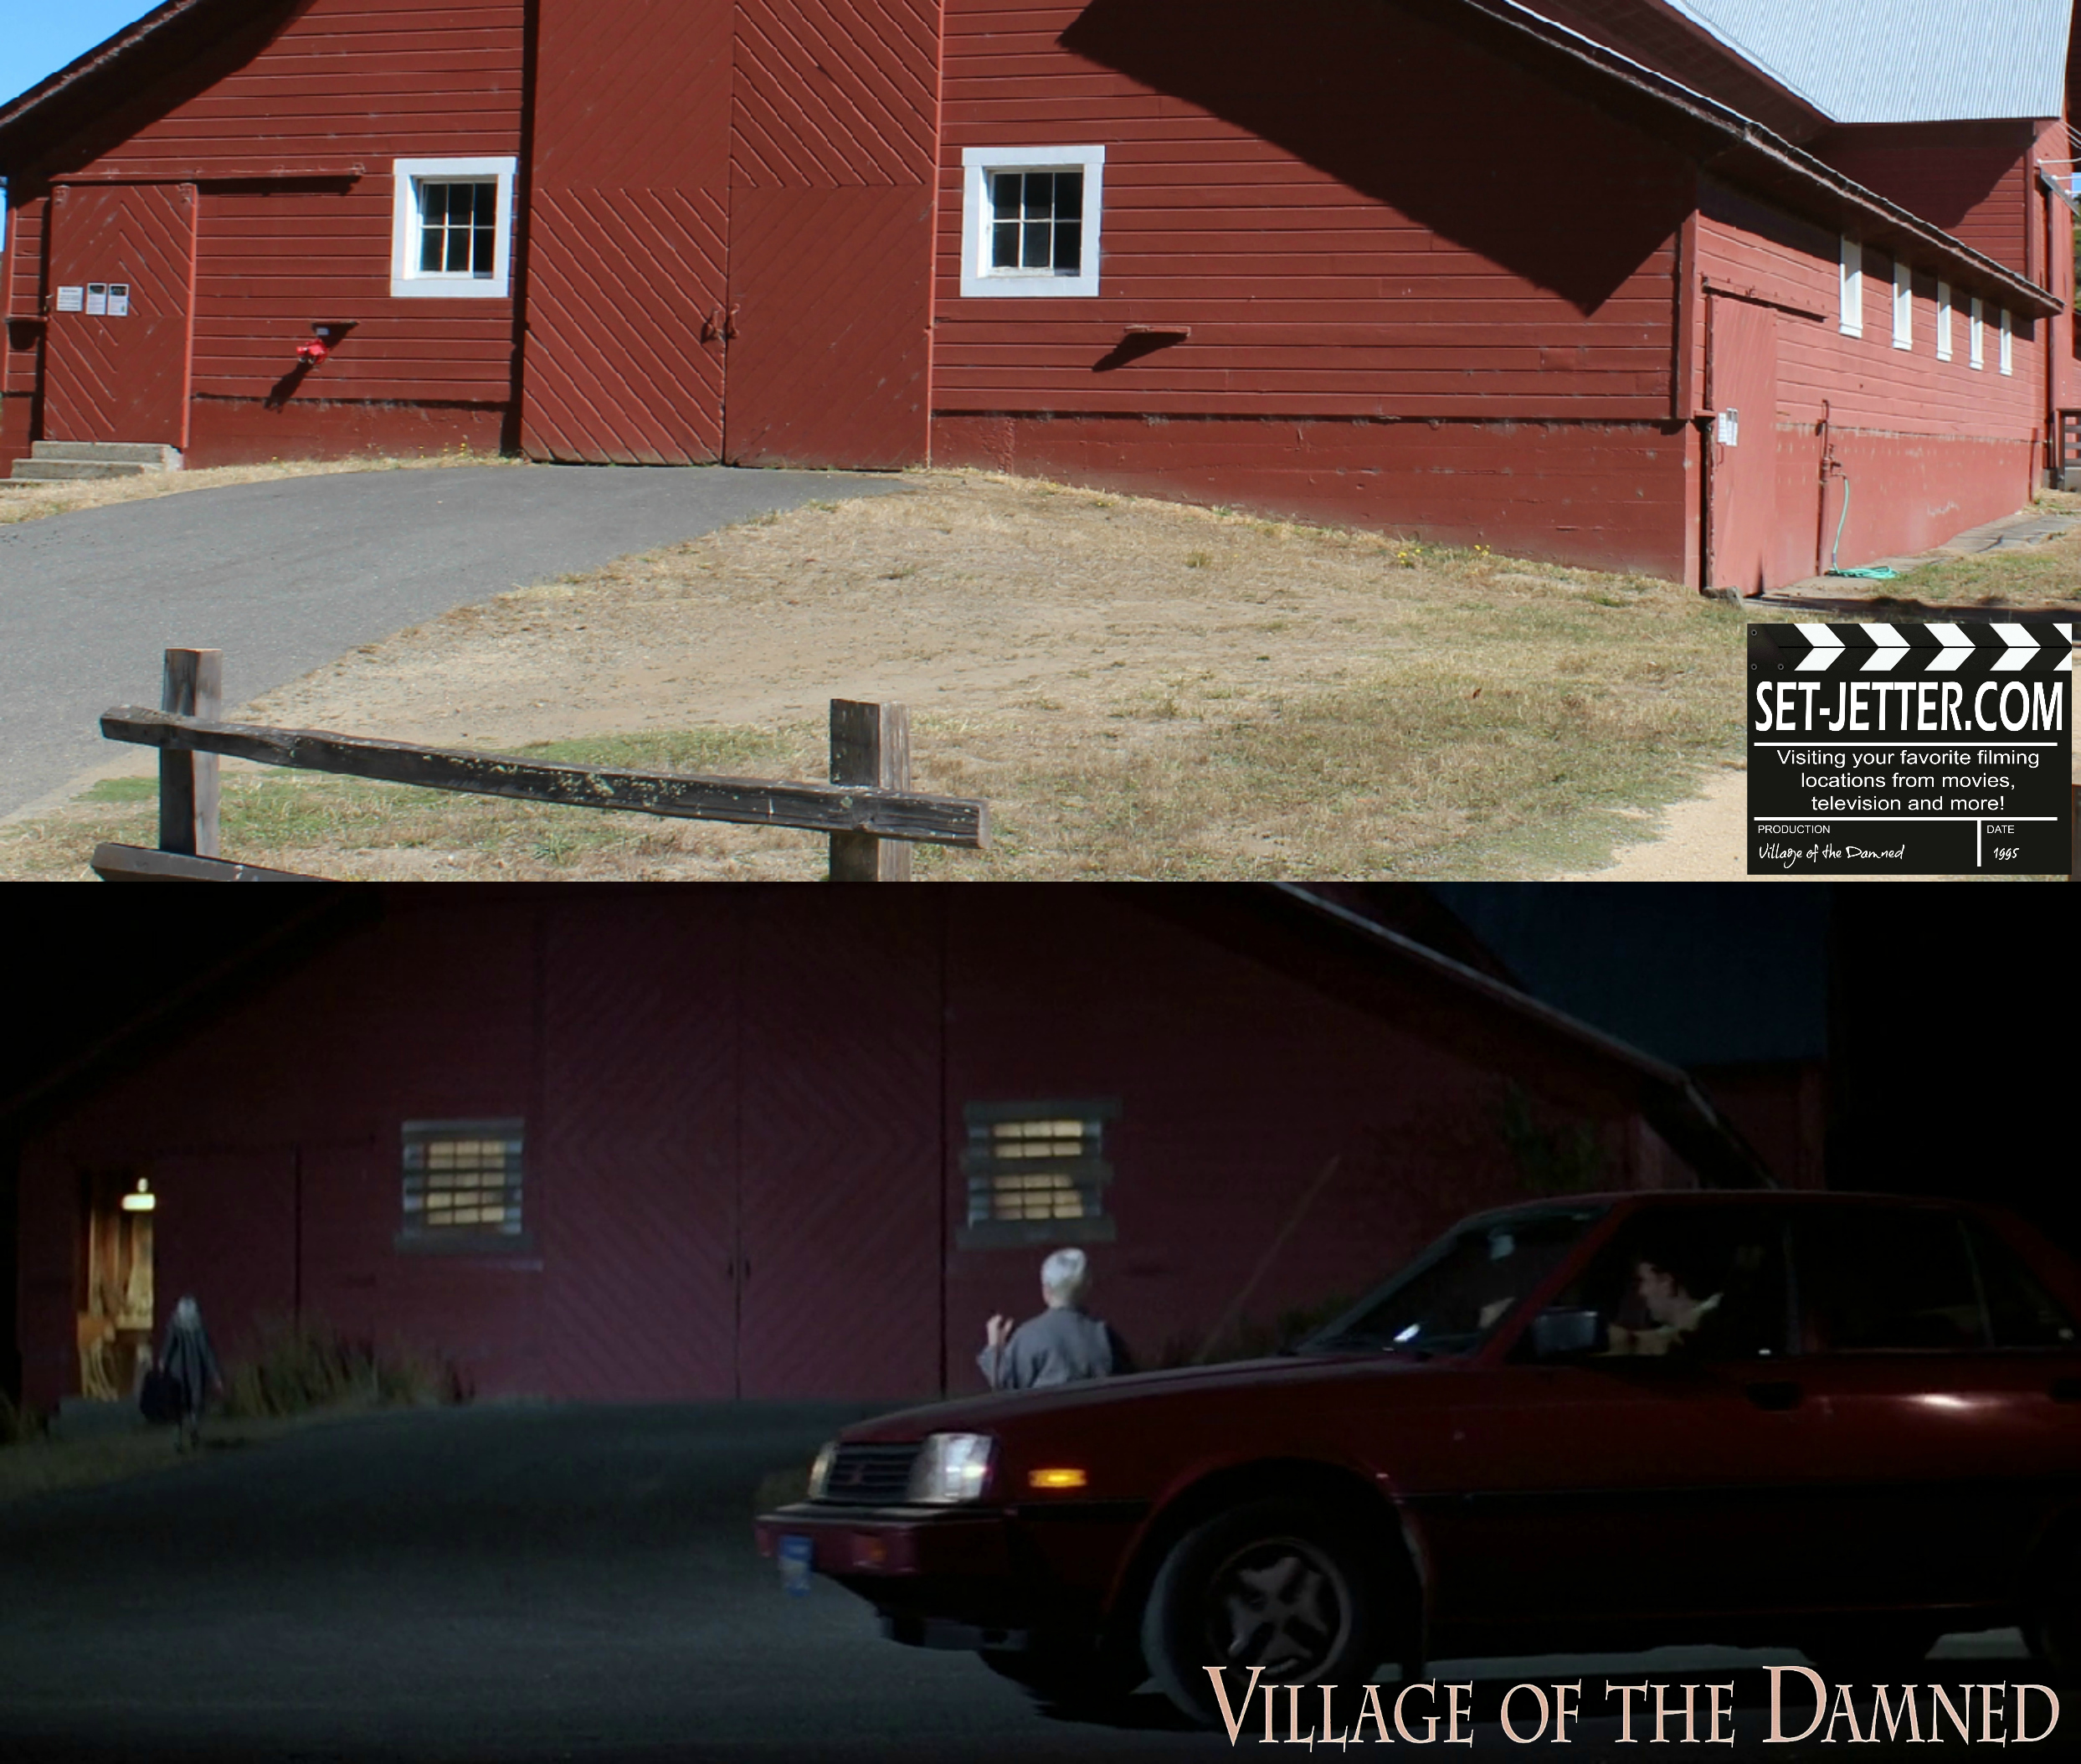 Village of the Damned comparison 188.jpg